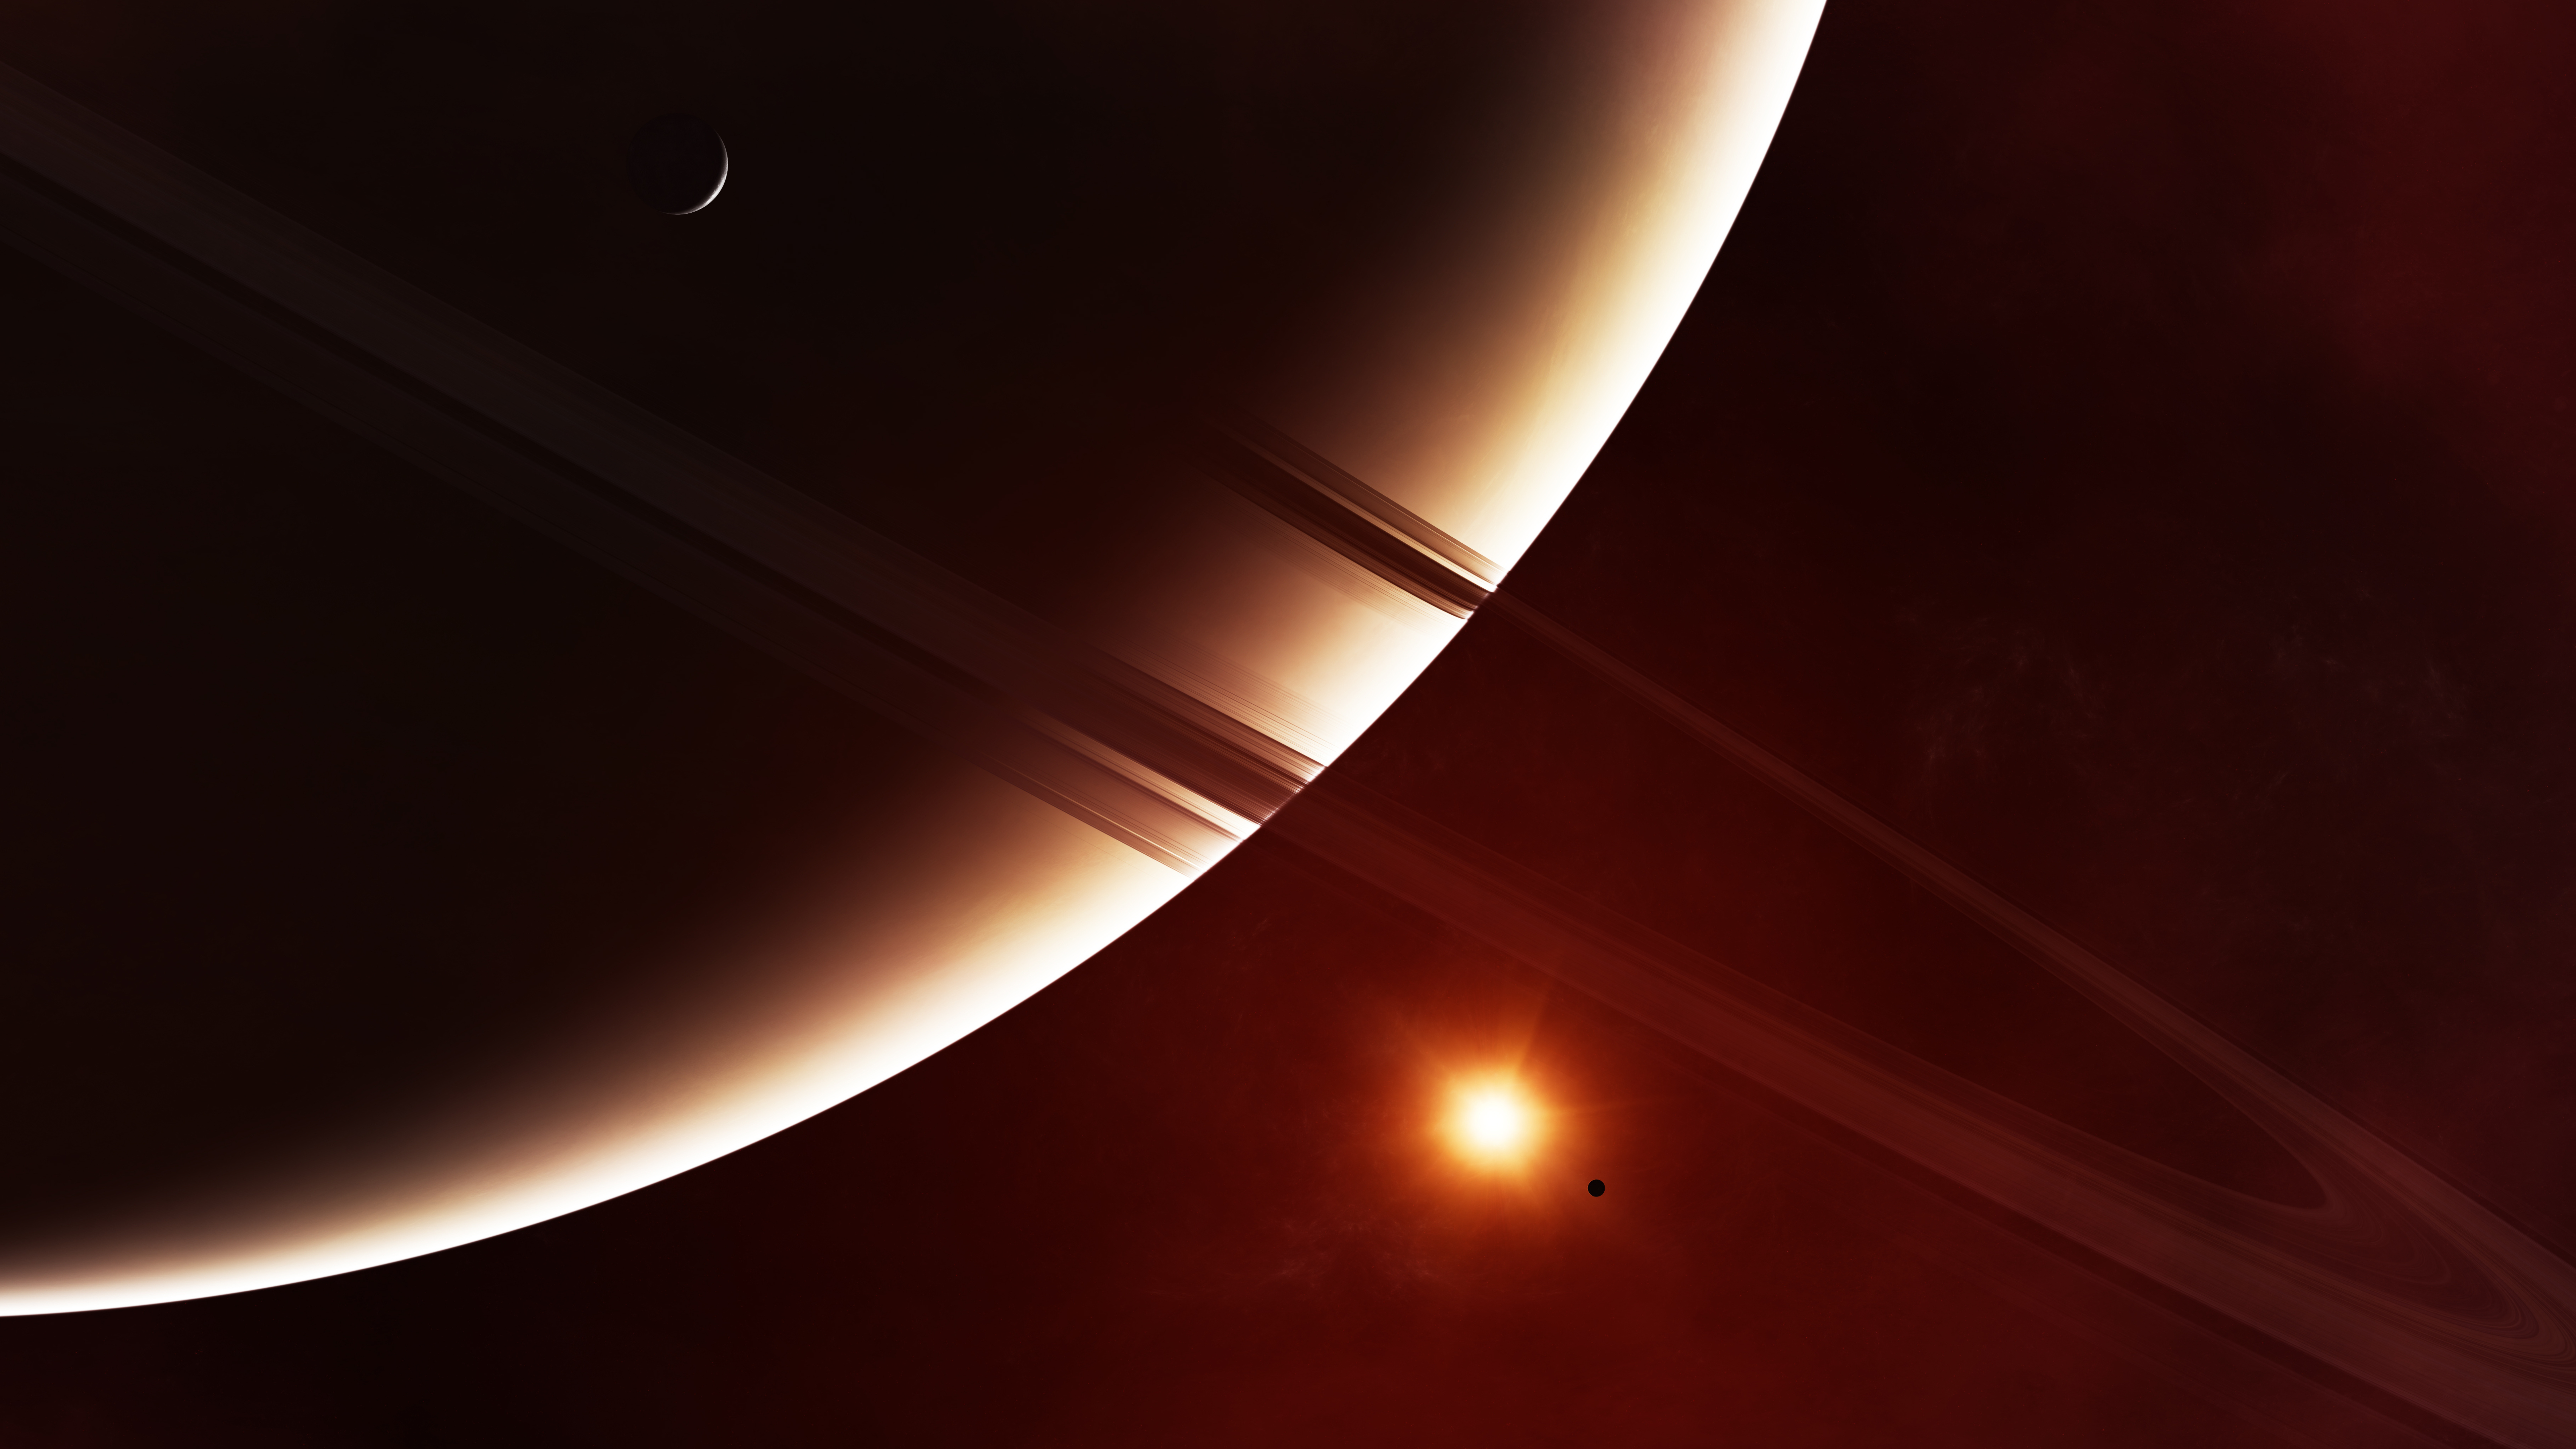 Free download Ultra Hd Wallpapers 8k 7680x4320 Previous planets